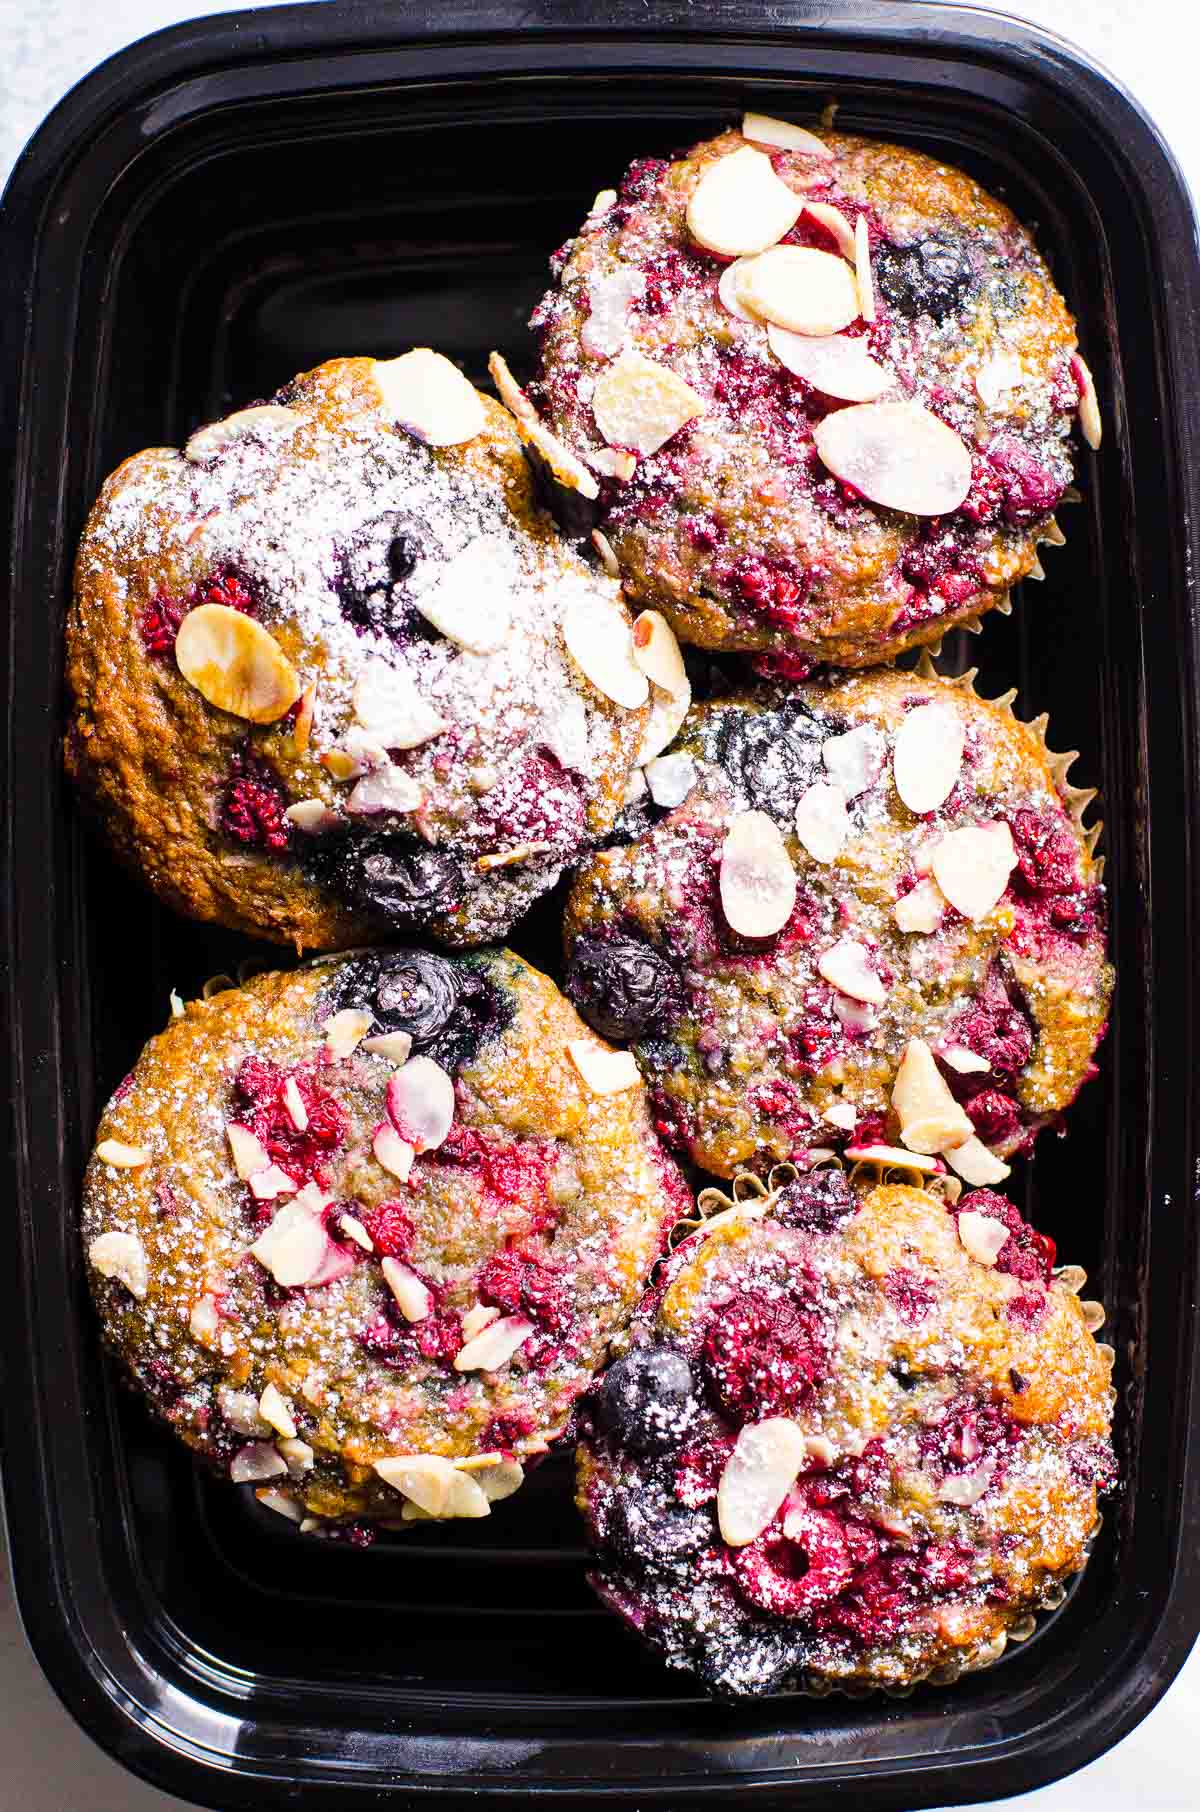 Healthy almond muffins in a black storage container.